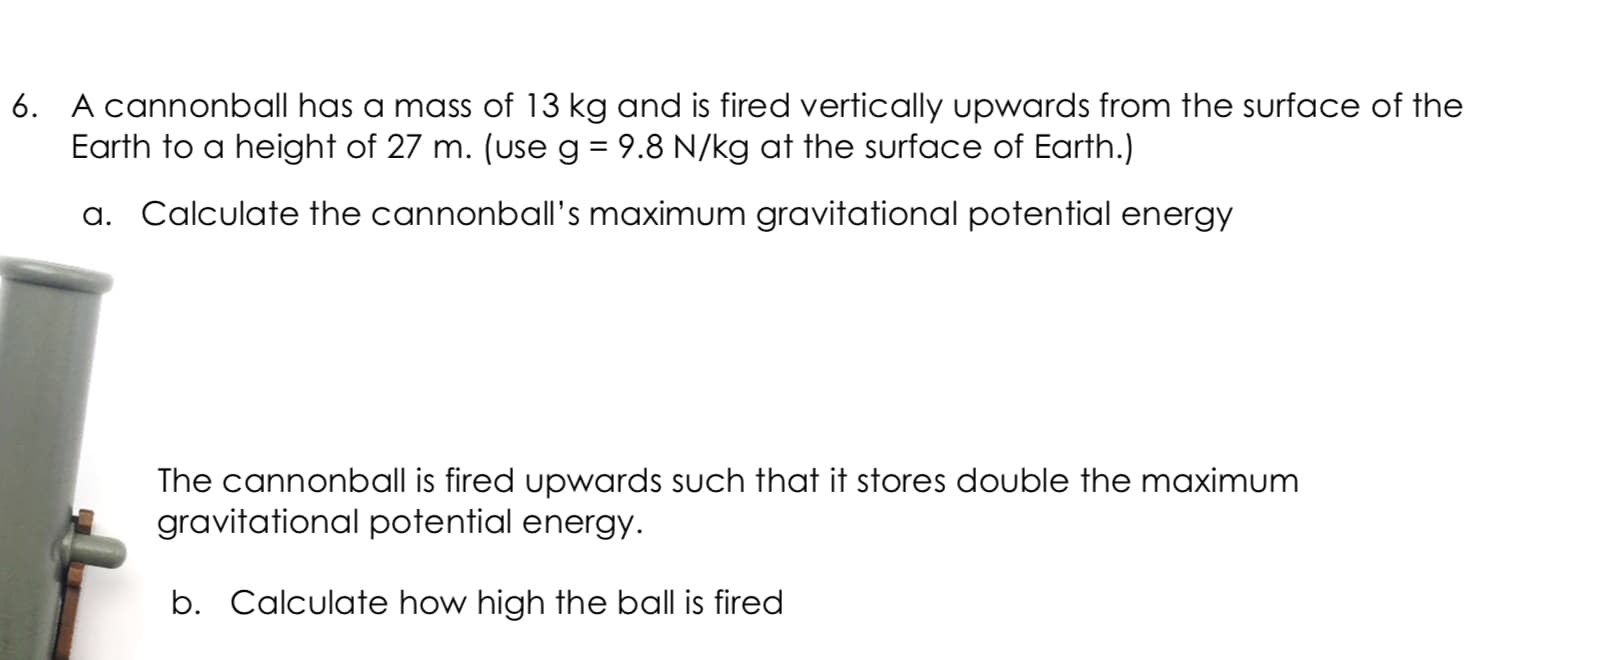 A cannonball has a mass of 13 kg and is fired vertically upwards from the surface of the
Earth to a height of 27 m. (use g = 9.8 N/kg at the surface of Earth.)
a. Calculate the cannonball's maximum gravitational potential energy
The cannonball is fired upwards such that it stores double the maximum
gravitational potential energy.
b. Calculate how high the ball is fired
